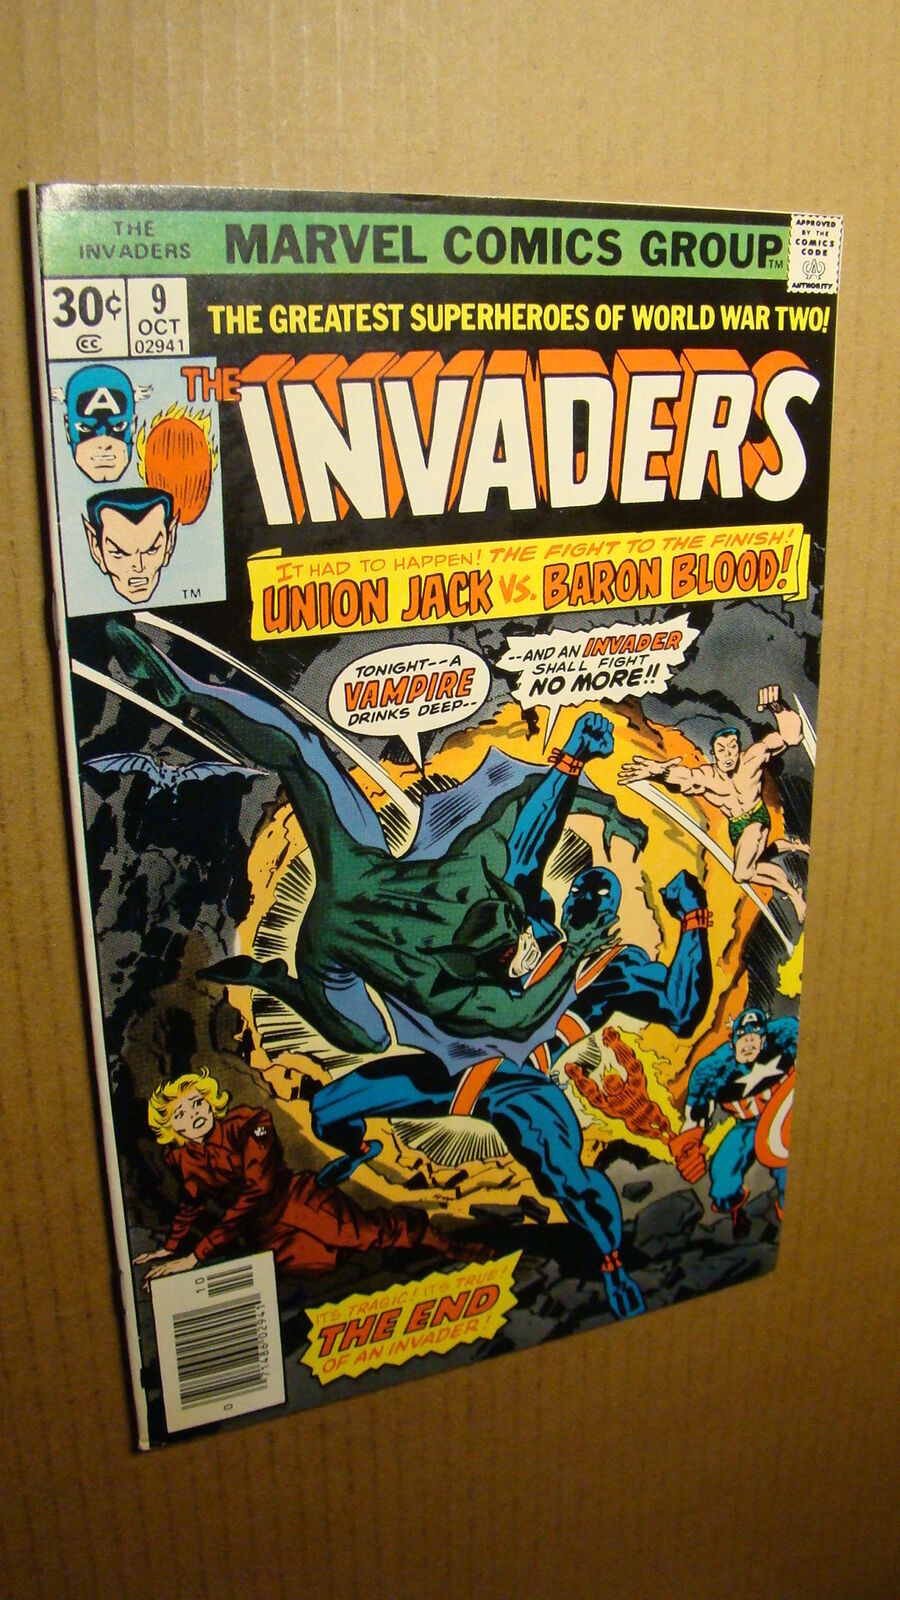 MARVEL COMICS THE INVADERS # 9 3RD APPEARANCE OF BARON BLOOD! VS UNION JACK